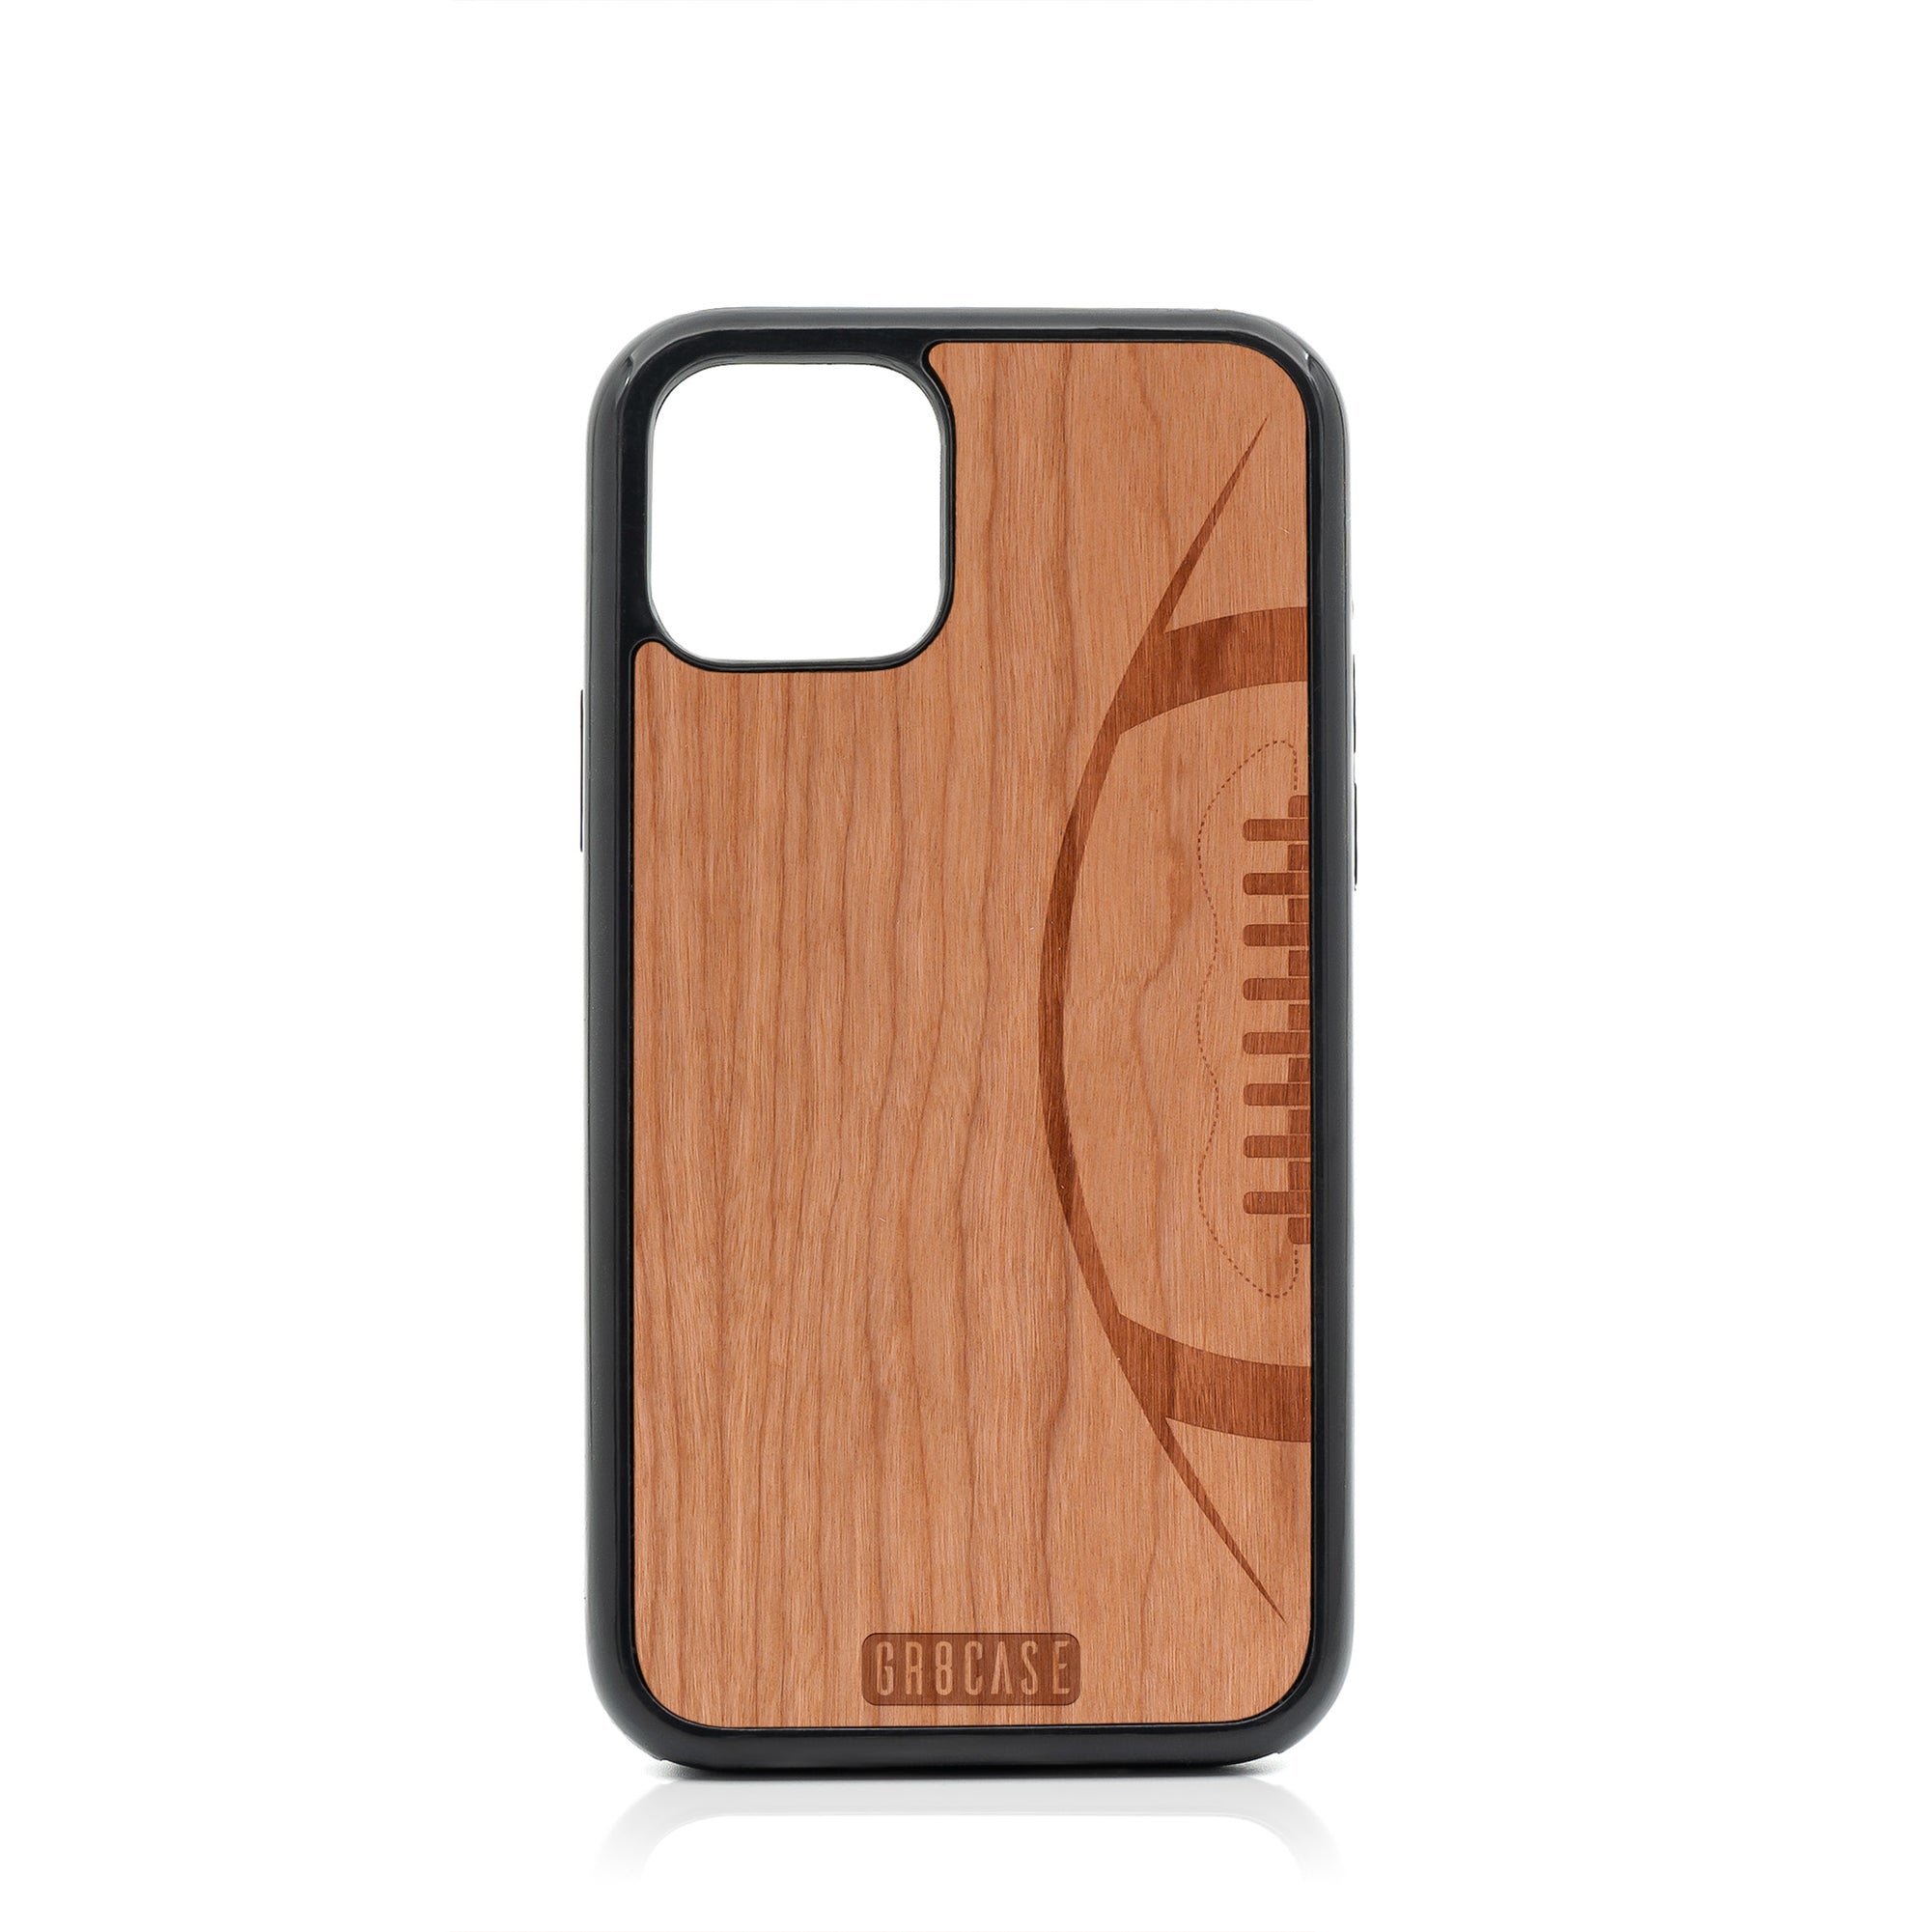 Football Design Wood Case For iPhone 11 Pro by GR8CASE